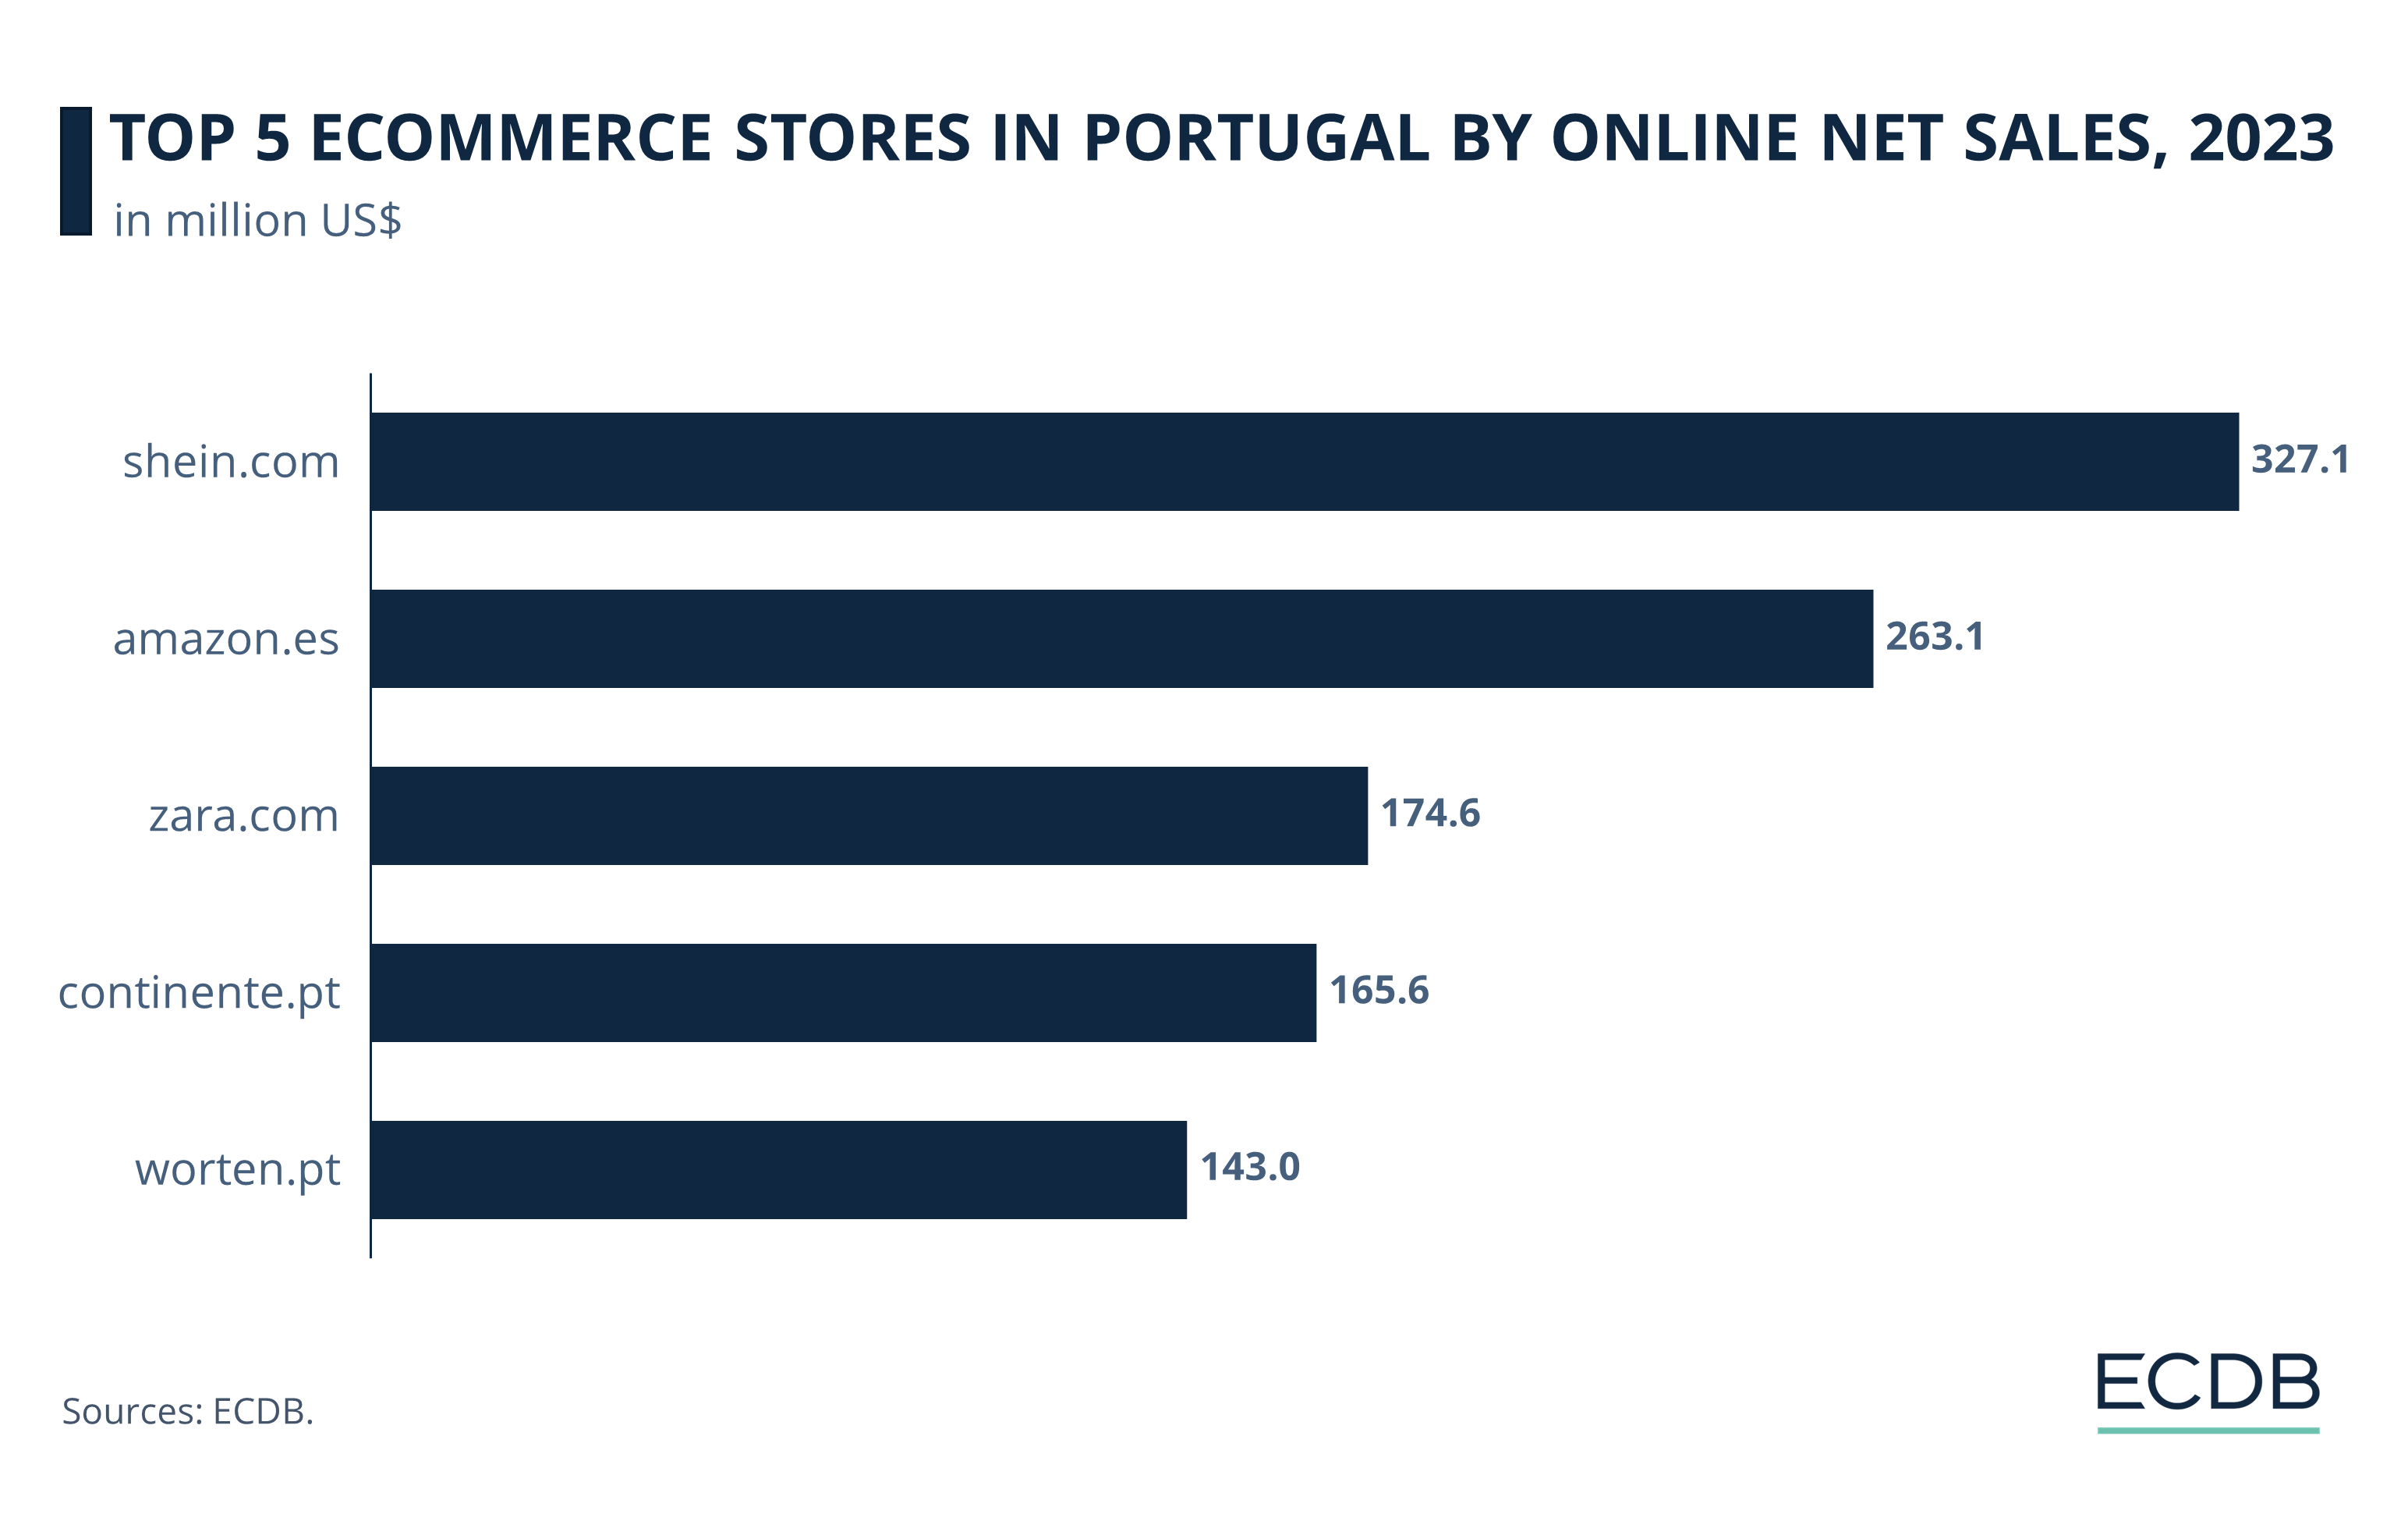 Top 5 eCommerce Stores in Portugal by Online Net Sales, 2023